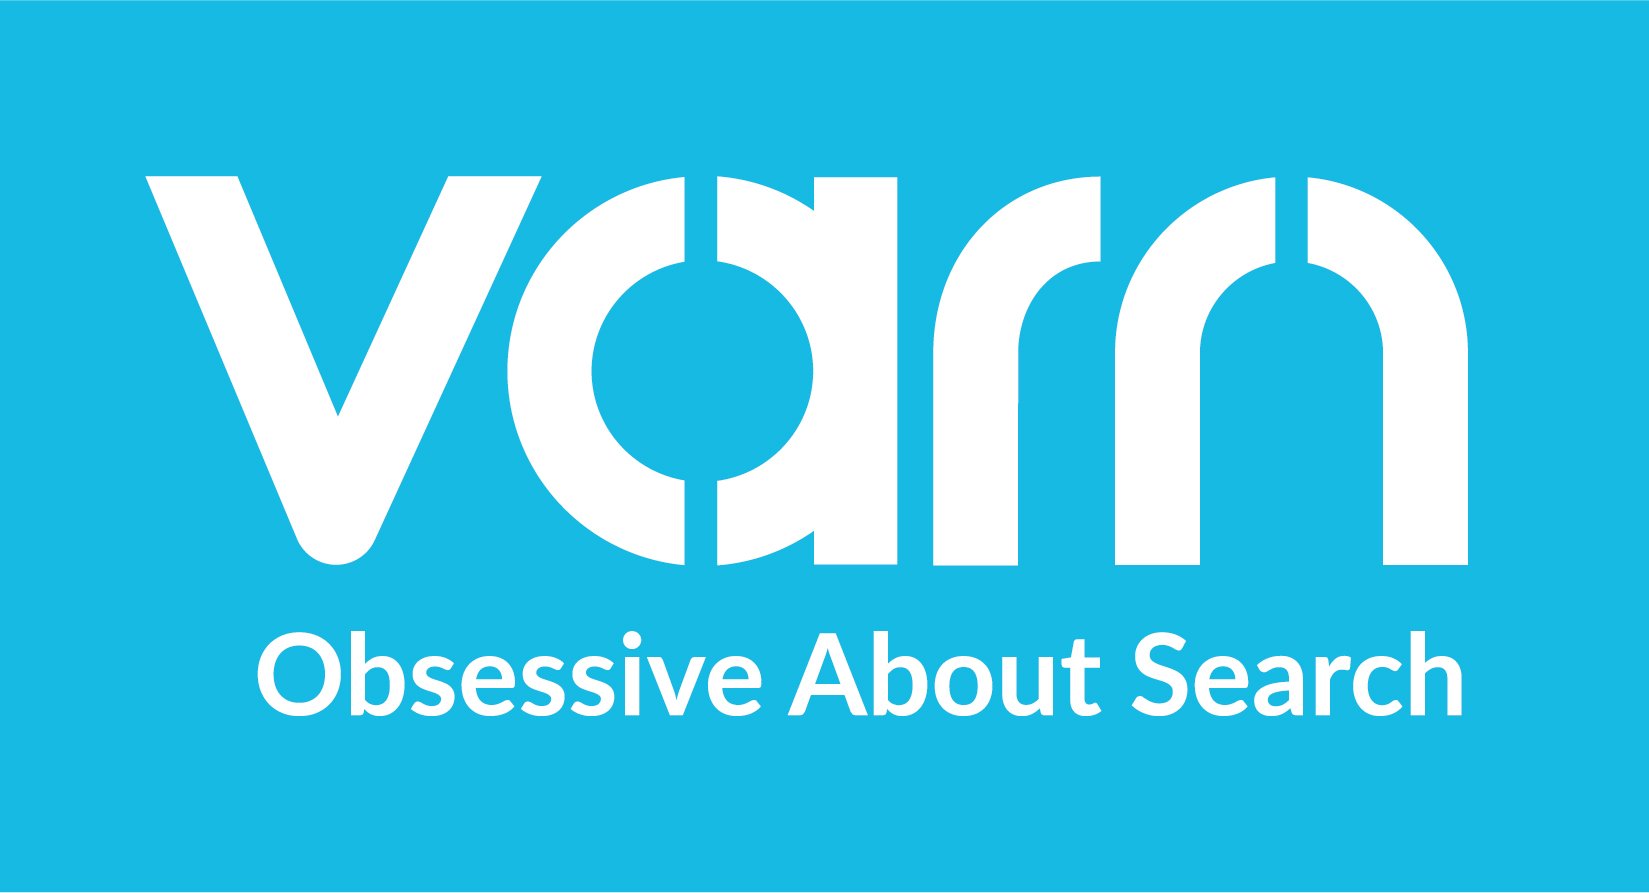 varn-obsessive-about-search-logo-white-on-blue.jpg